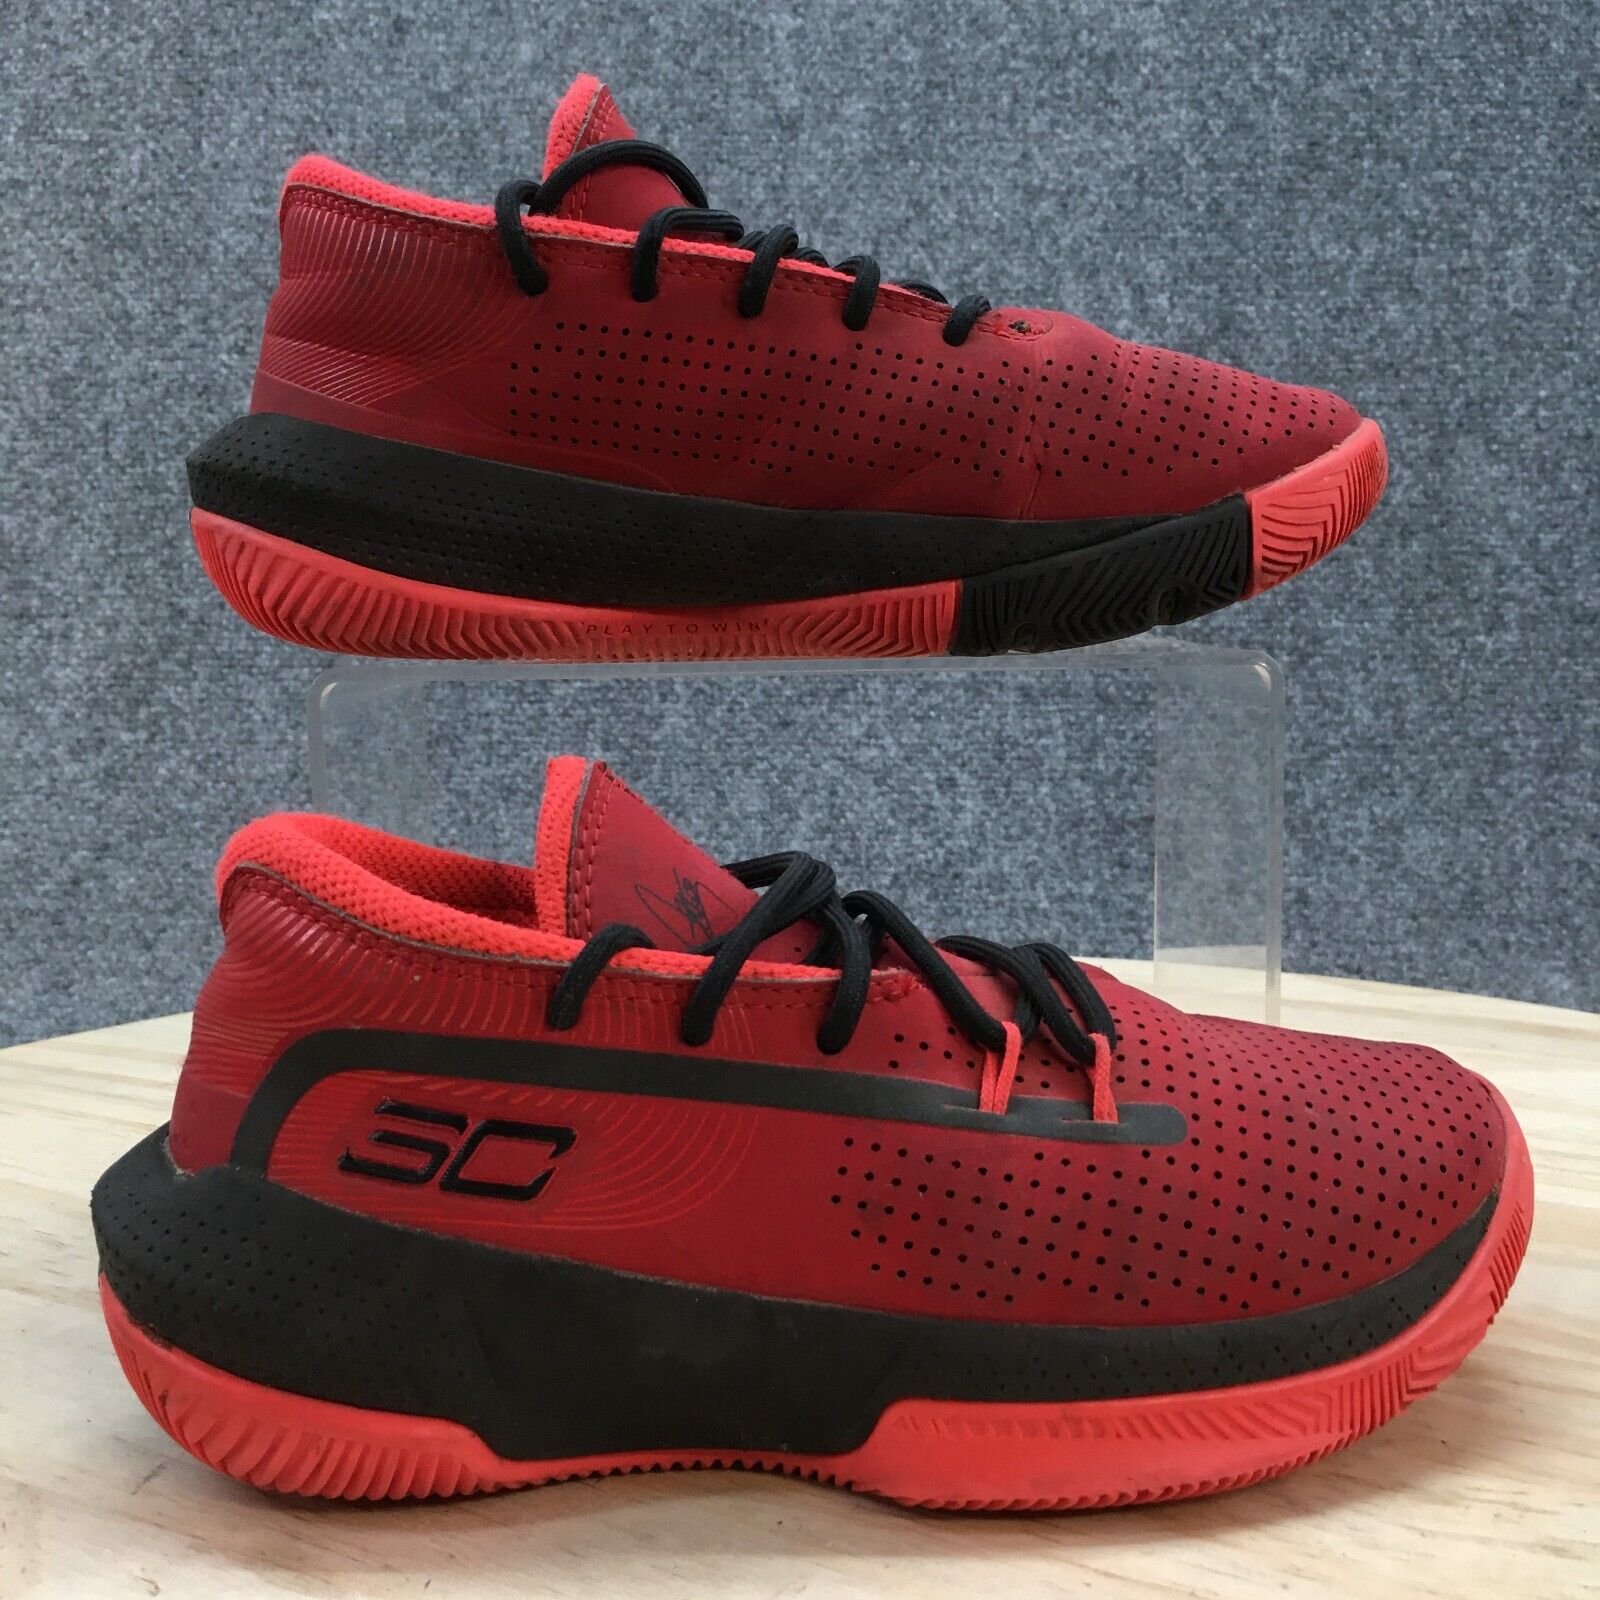 Under Armour Basketball Youth Red Boys SC Stephen Curry | eBay